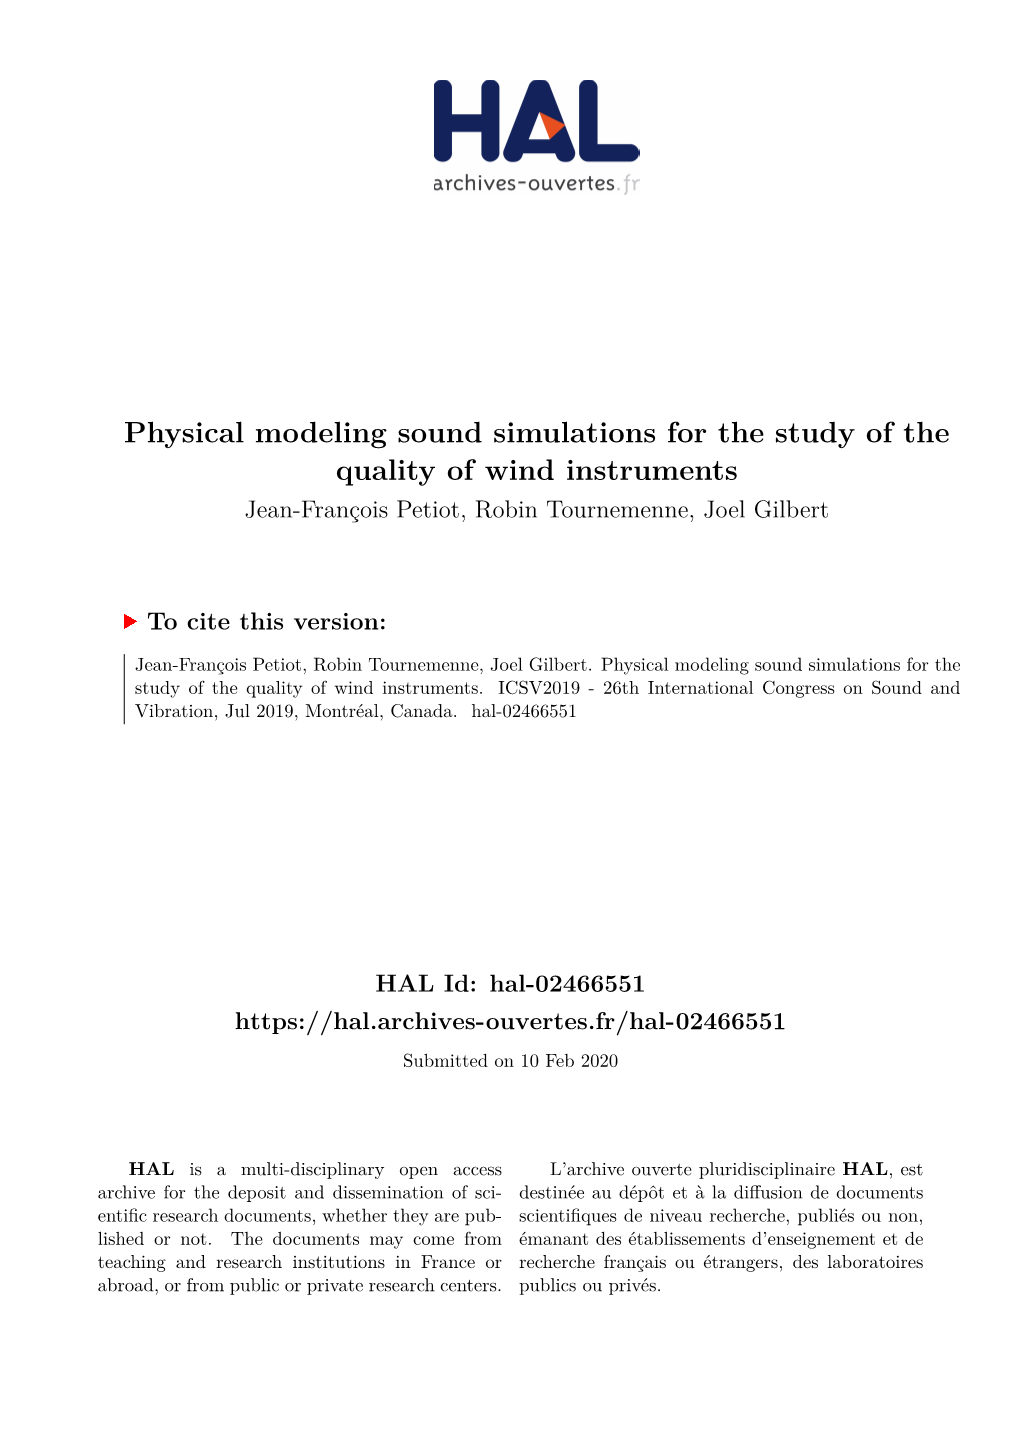 Physical Modeling Sound Simulations for the Study of the Quality of Wind Instruments Jean-François Petiot, Robin Tournemenne, Joel Gilbert